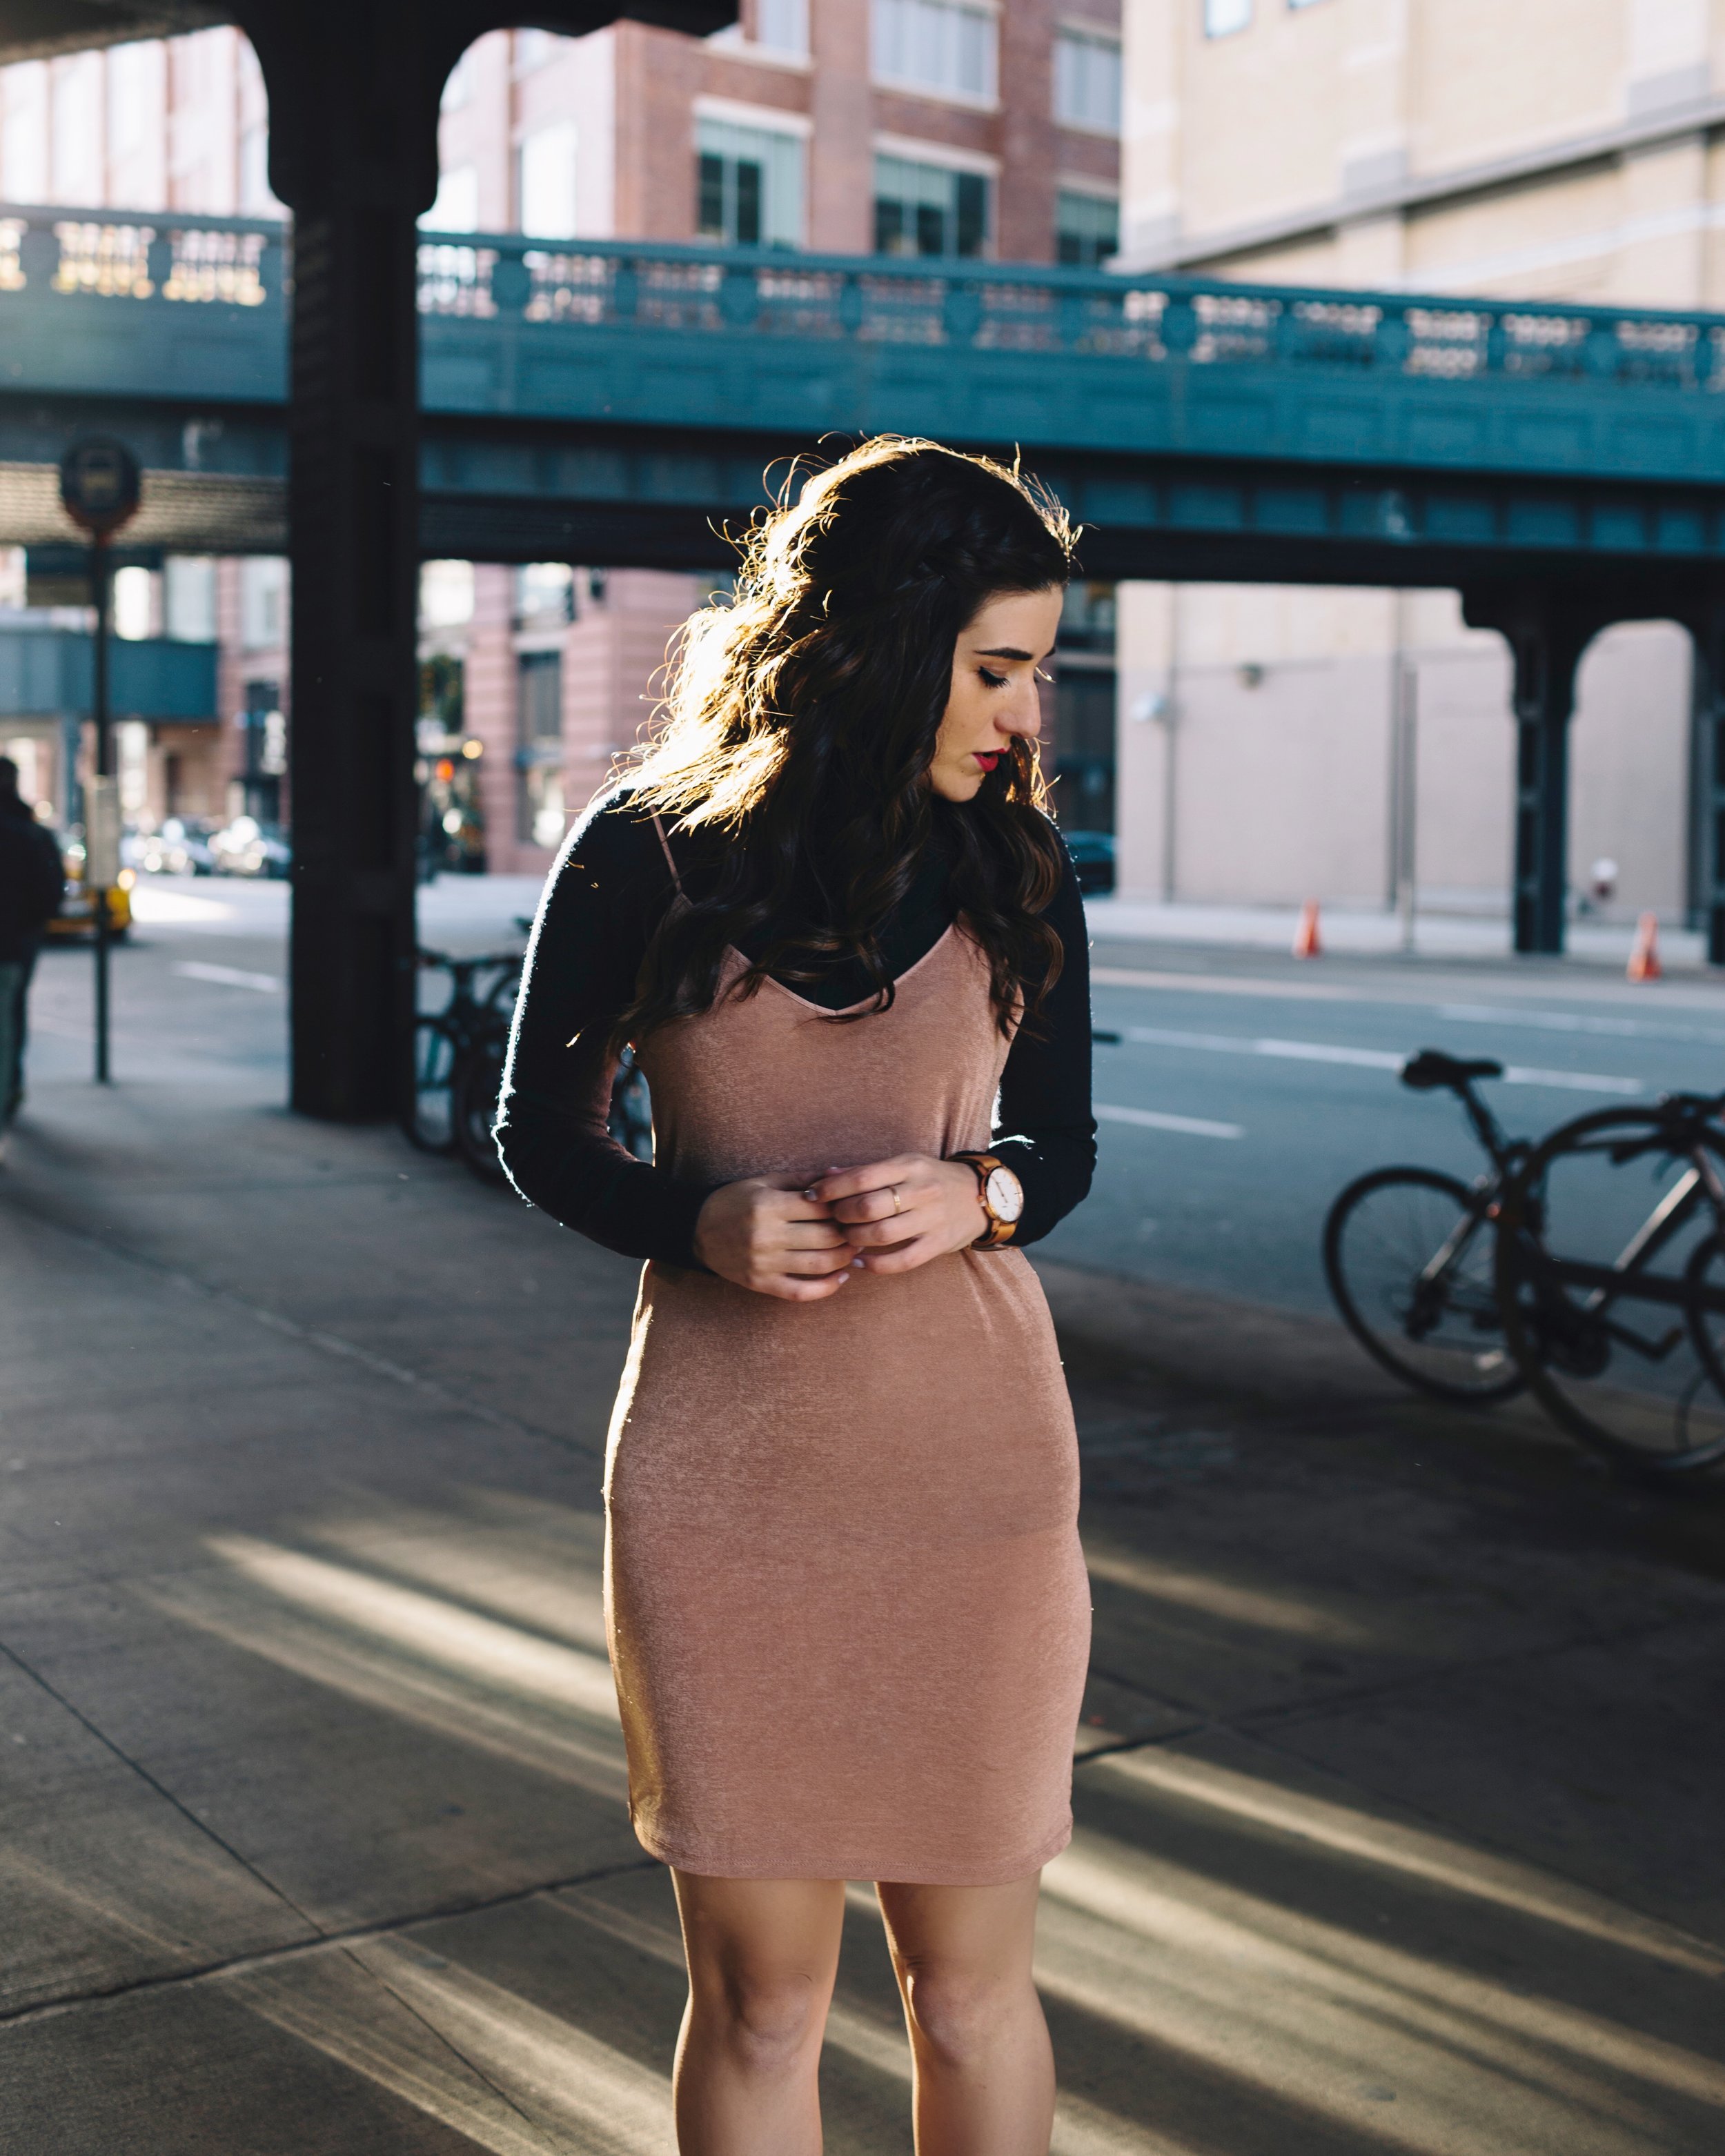 Navy Turtleneck + Pink Slip Dress Finding Your Niche Esther Santer Fashion Blog Louboutins & Love NYC Street Style Blogger Outfit OOTD Trendy Booties Shoes Hair Girl Women Winter Look Shopping  Zara Shirt M4D3 Banana Republic  Photoshoot New York City.JPG